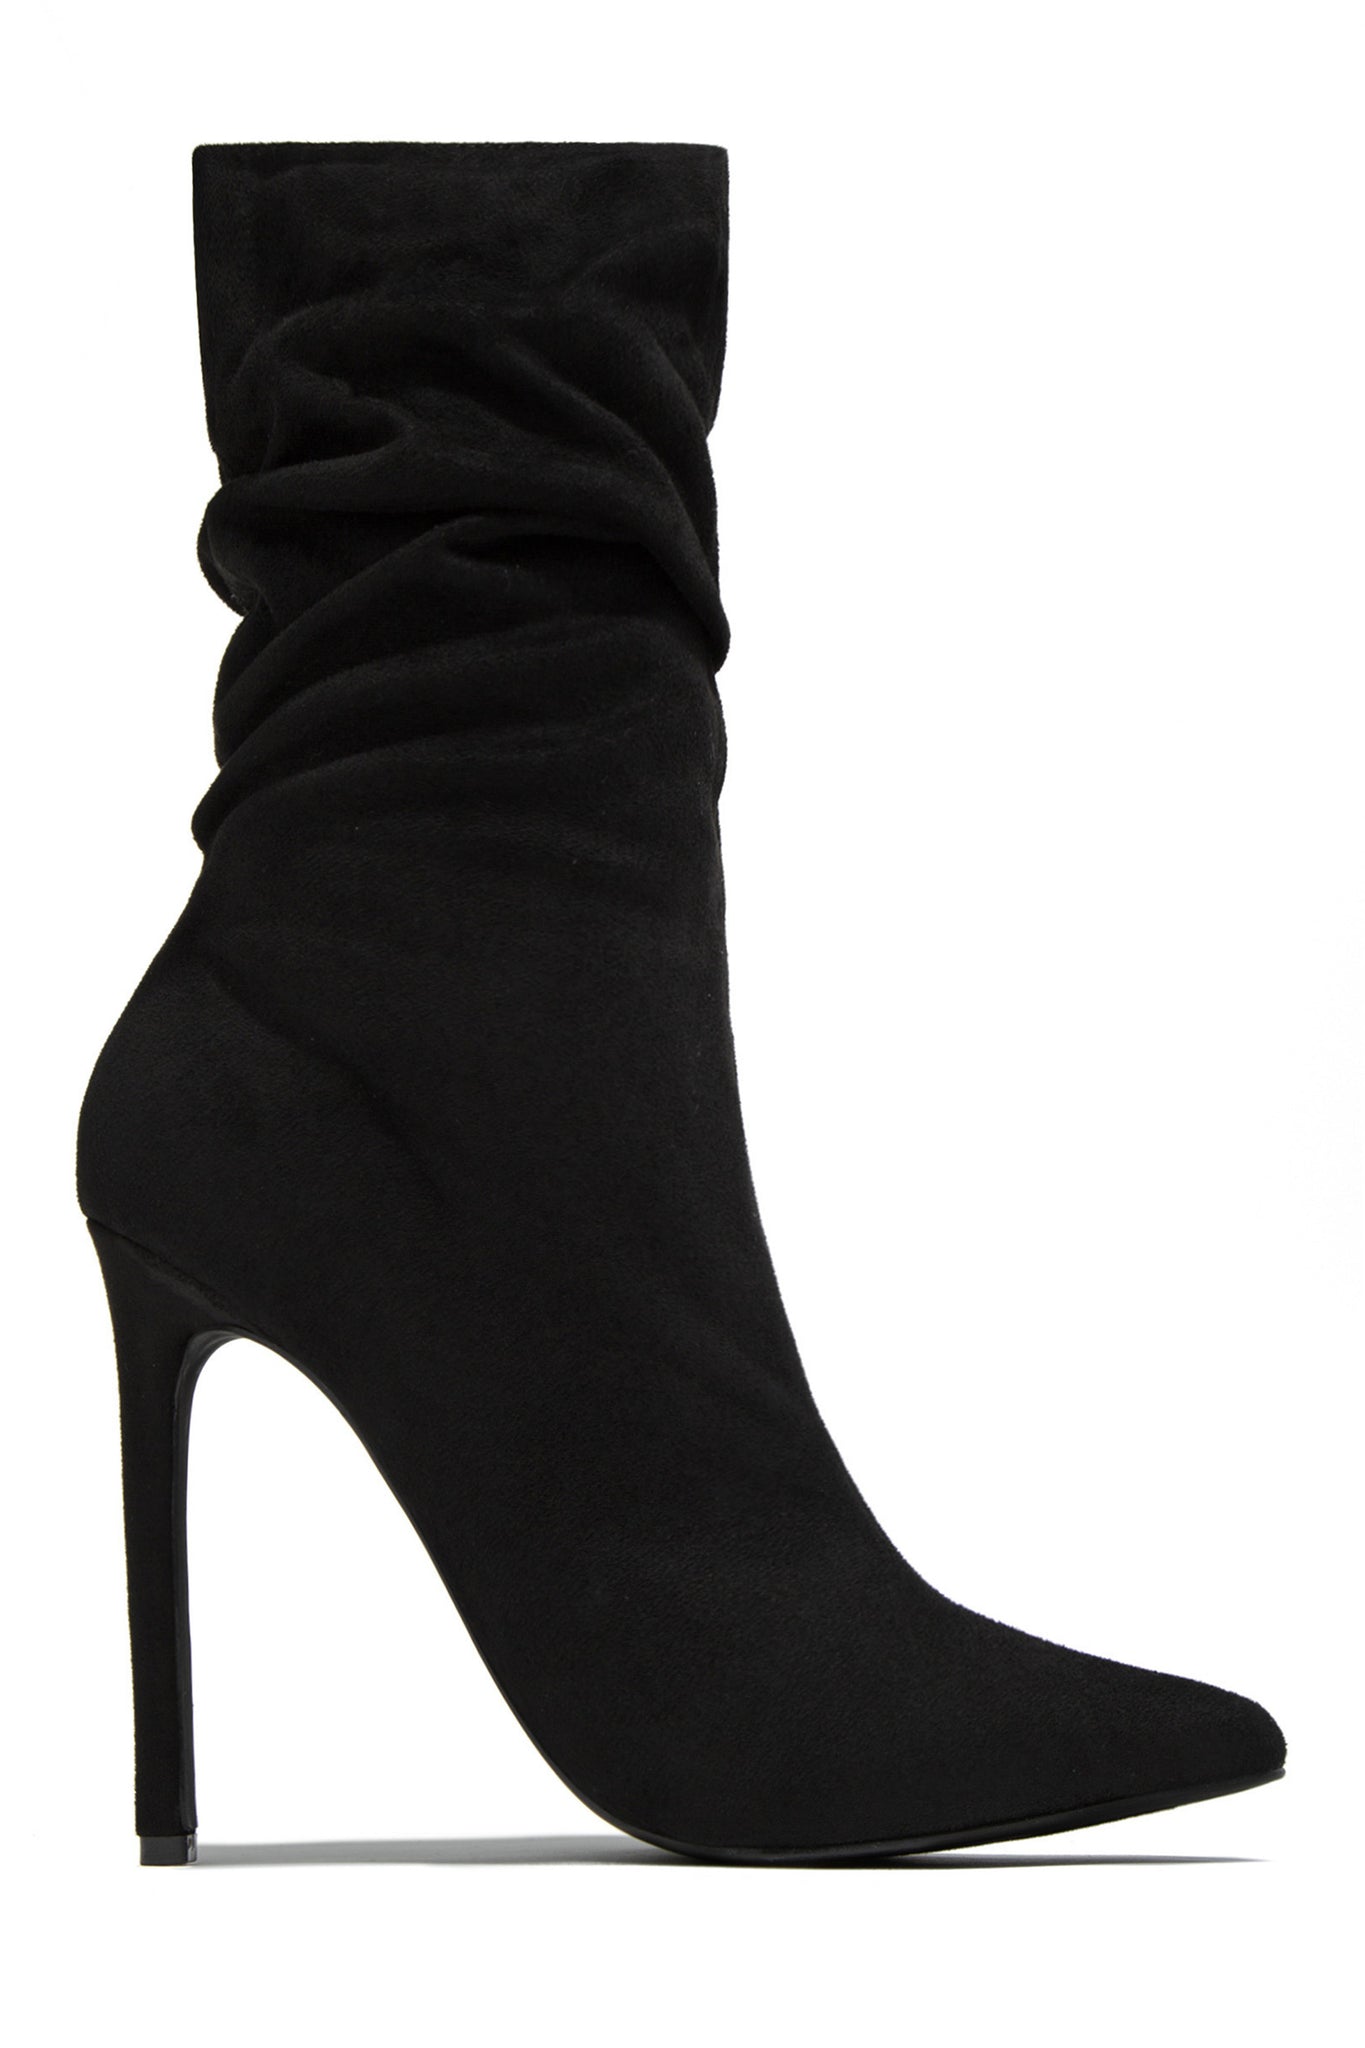 Miss Lola | Black Ruched Detailed Ankle Heel Boots – MISS LOLA